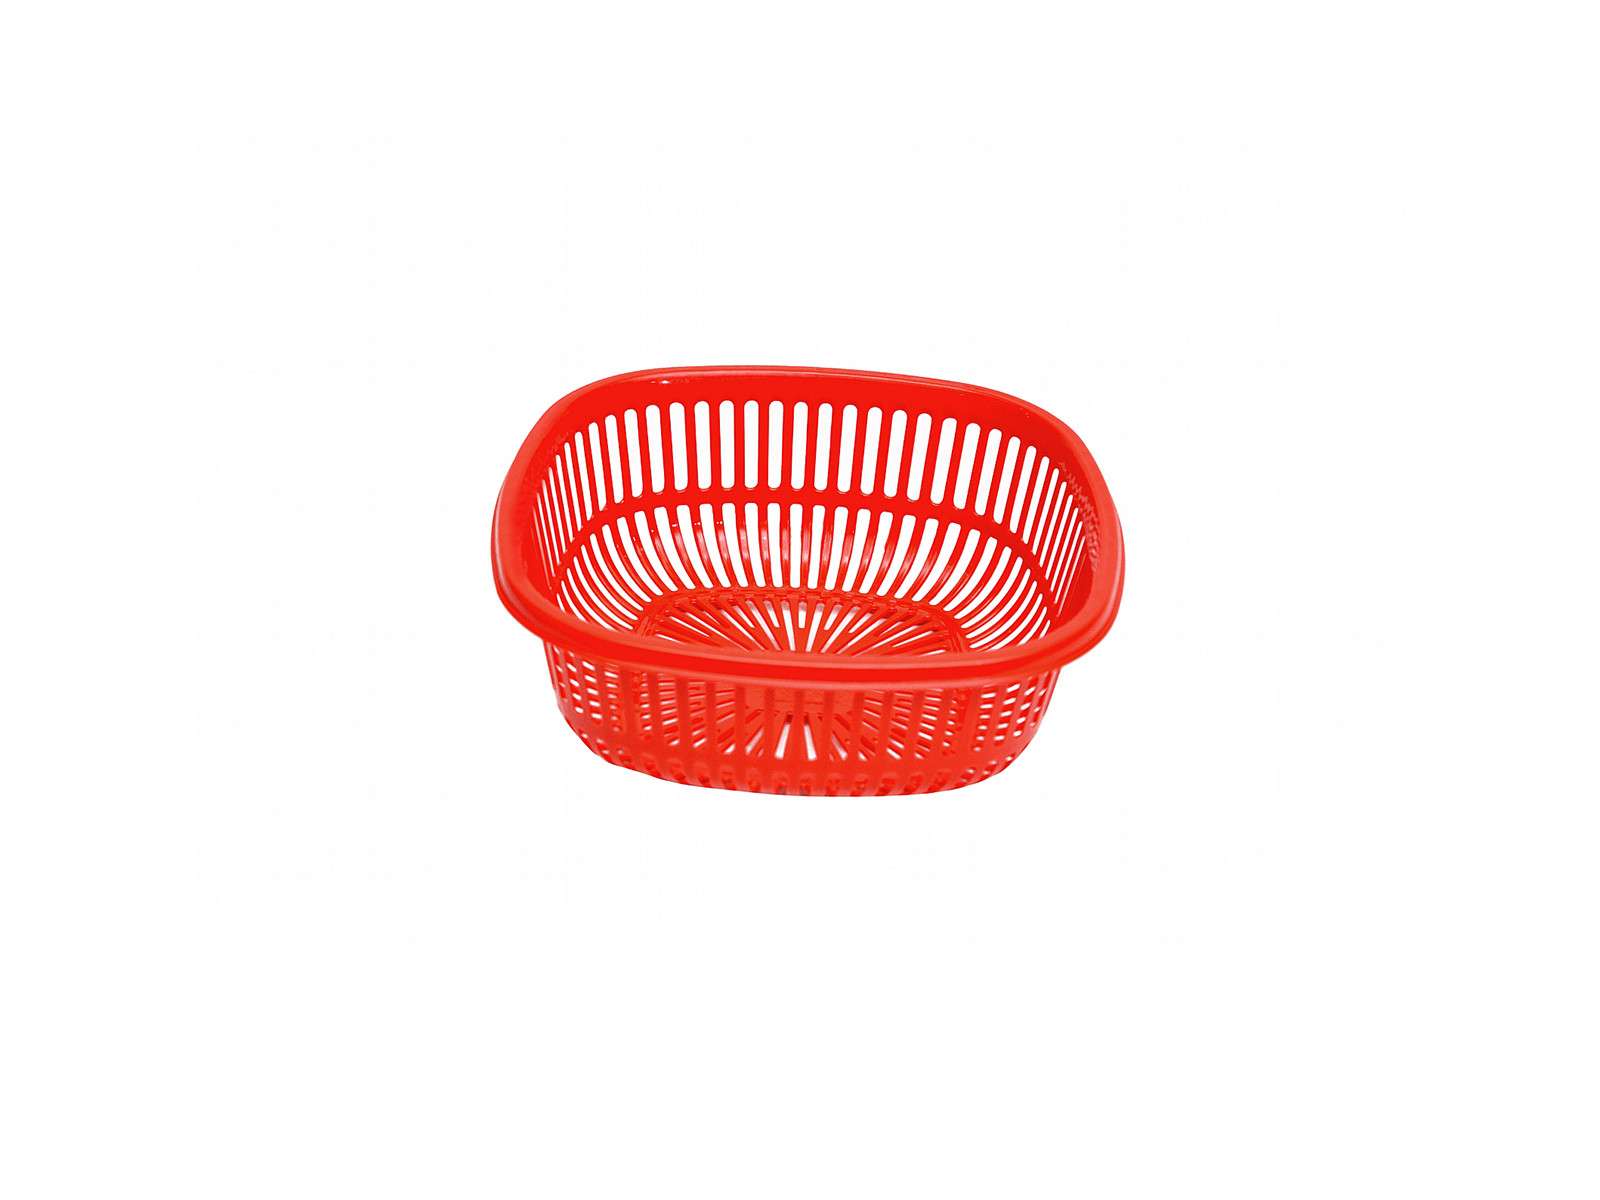 Rounded Rectangular Basket 2T2 - square hollow